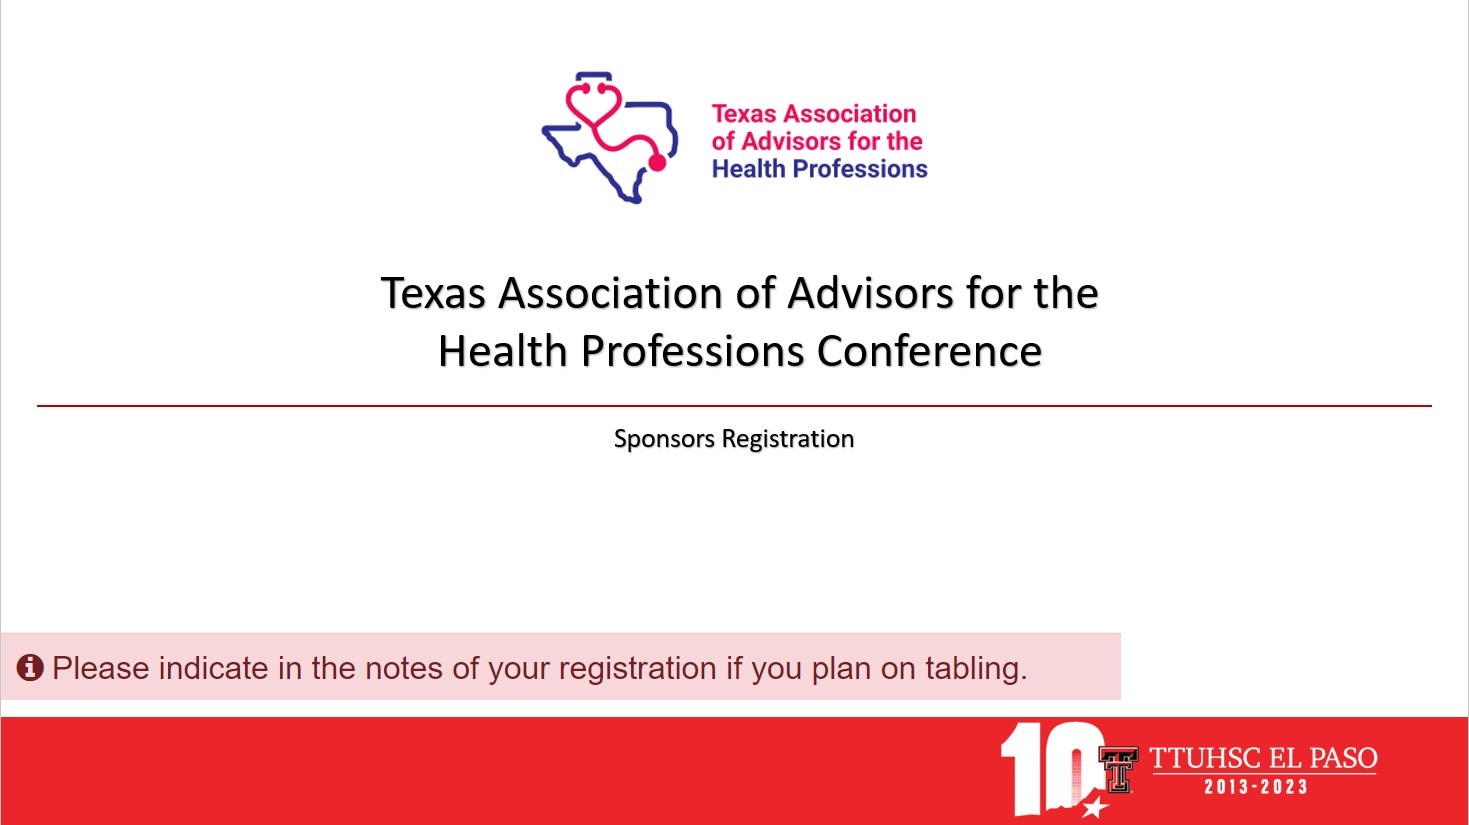 Texas Association of Advisors in the Health Professions Conference for Sponsors